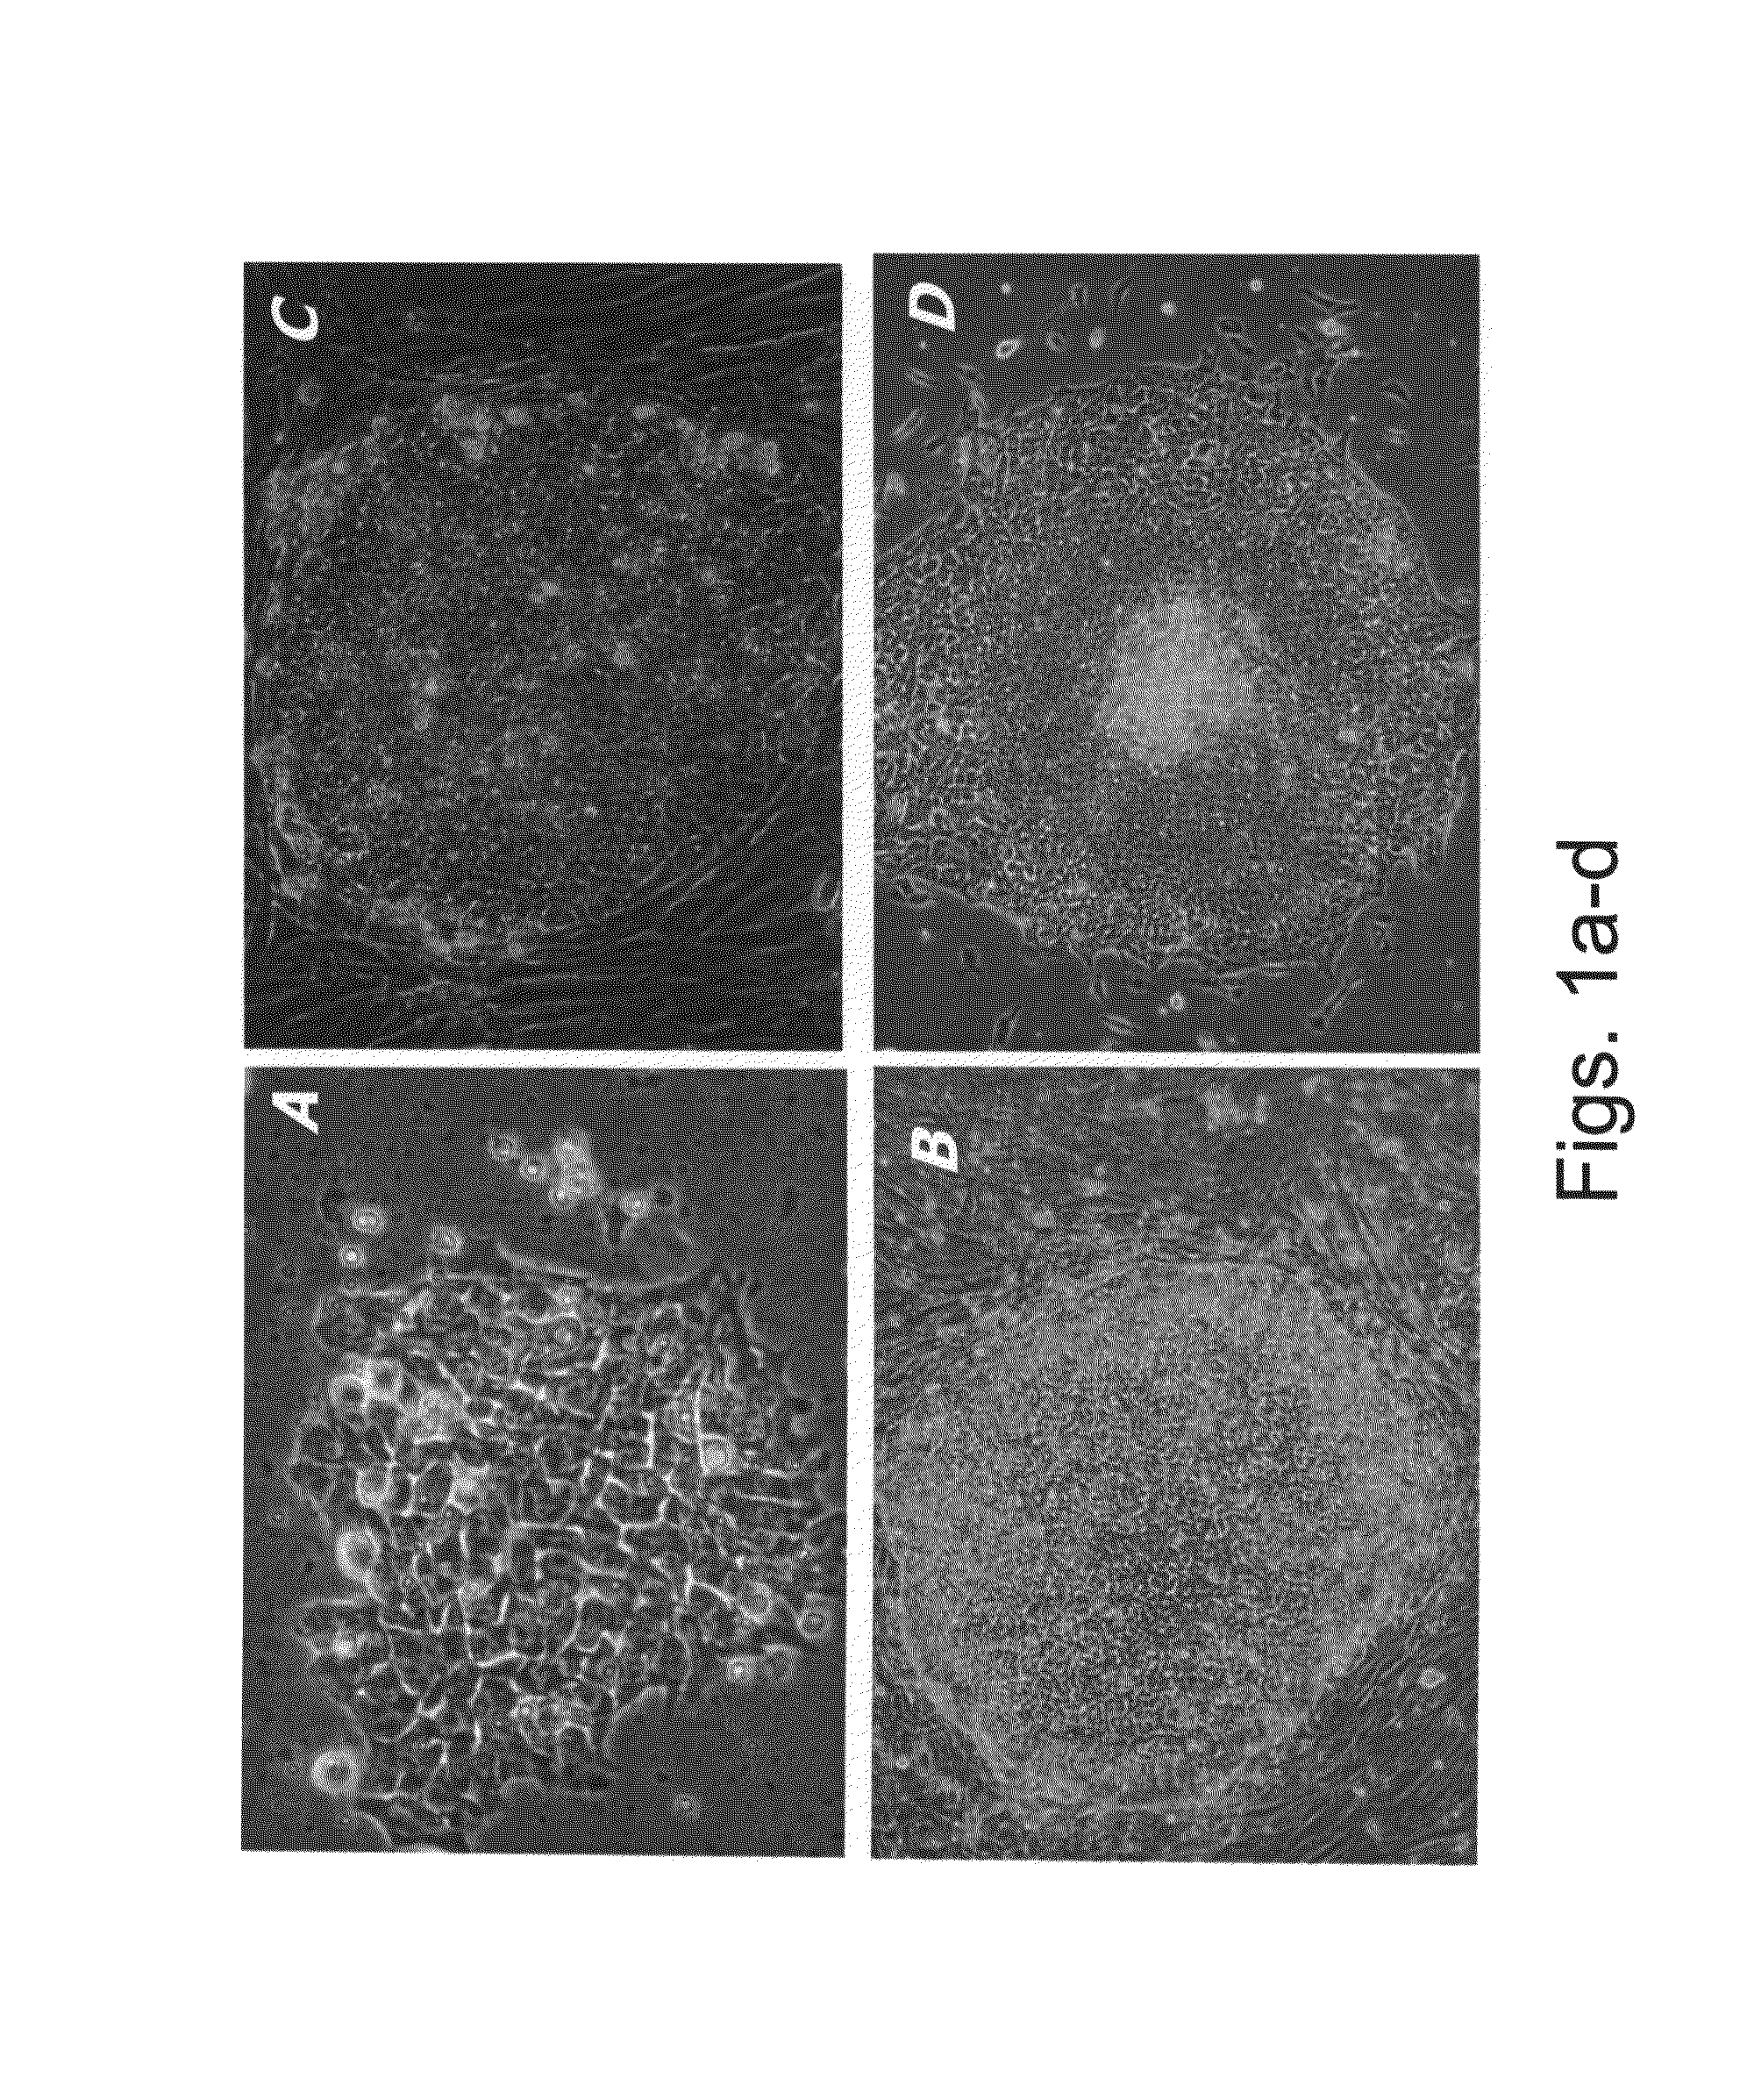 Methods of expanding embryonic stem cells in a suspension culture